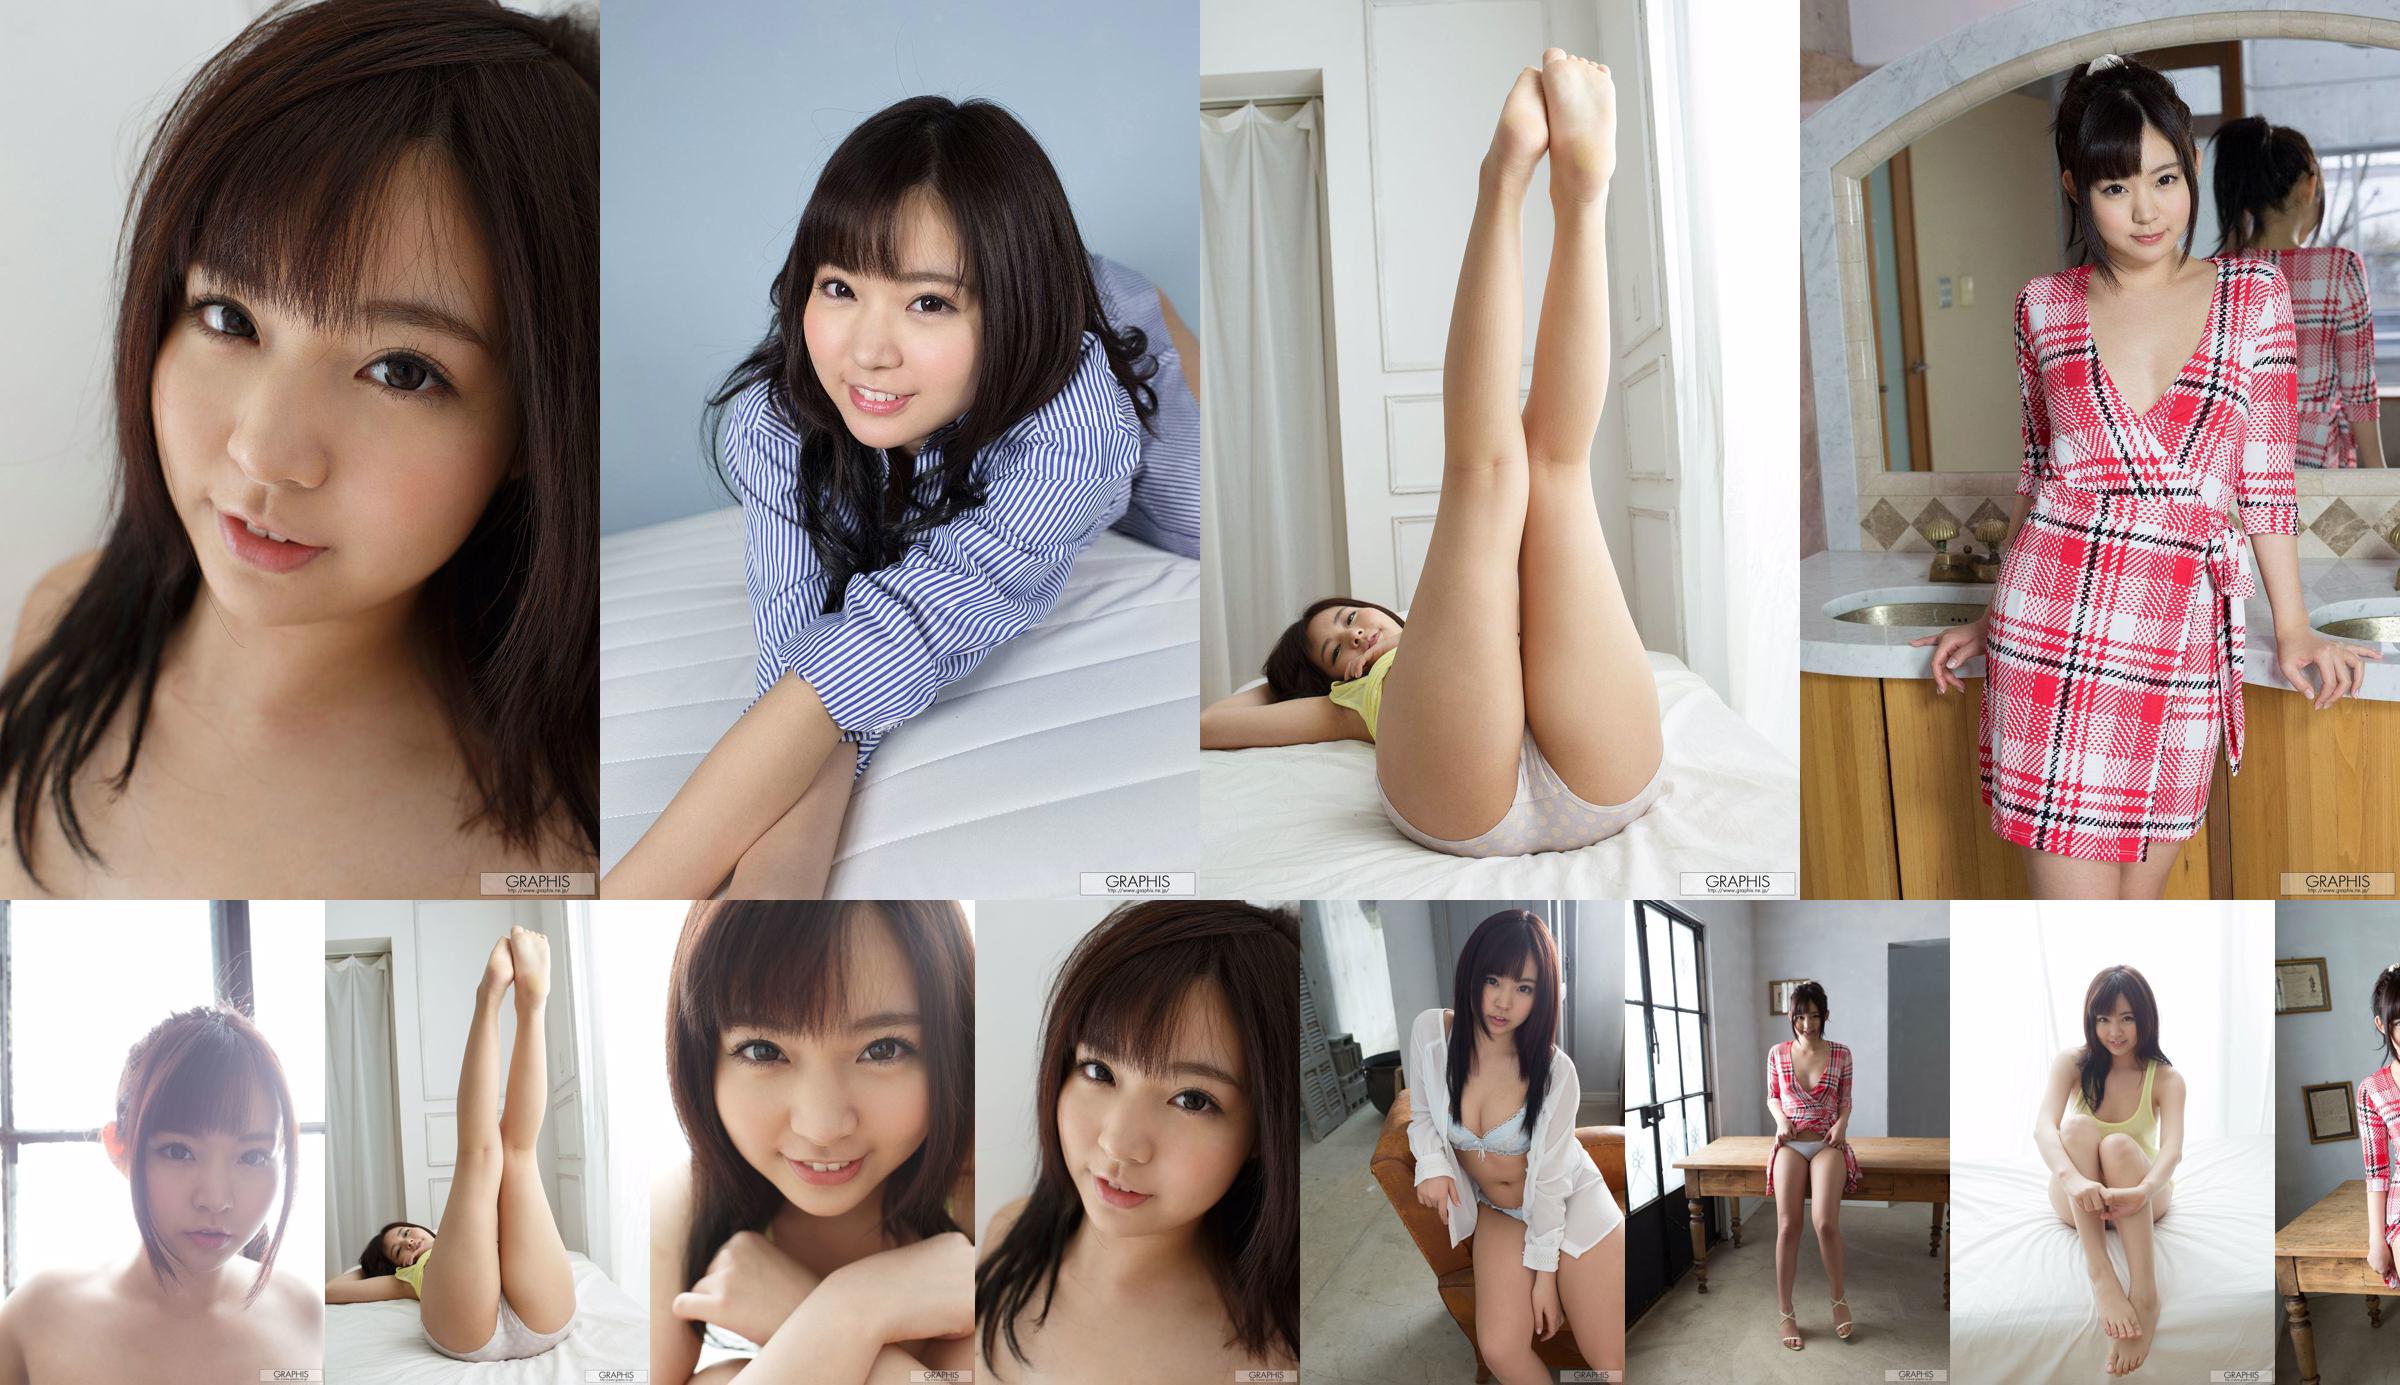 Nana Ayano "Everywhere" [Graphis] Gals No.9edf0d Page 9